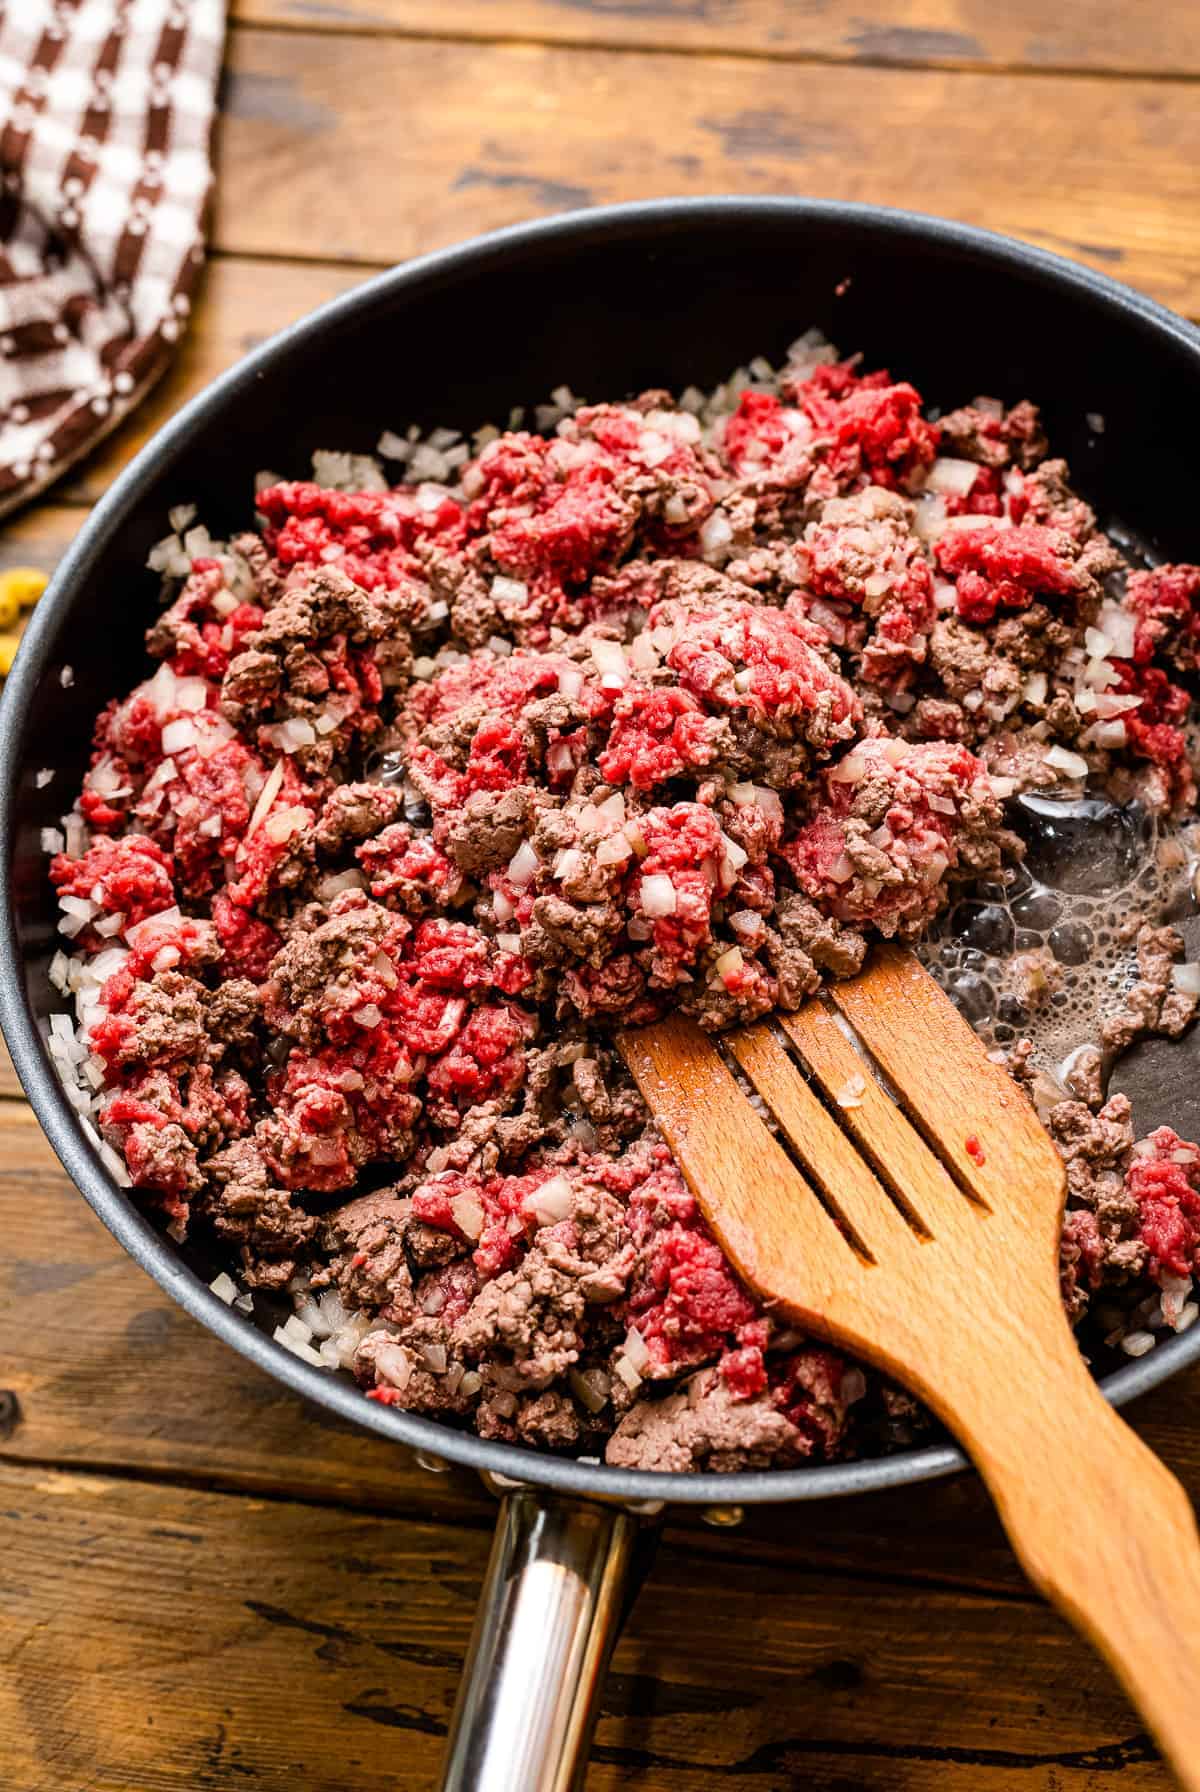 Skillet with ground beef being browned